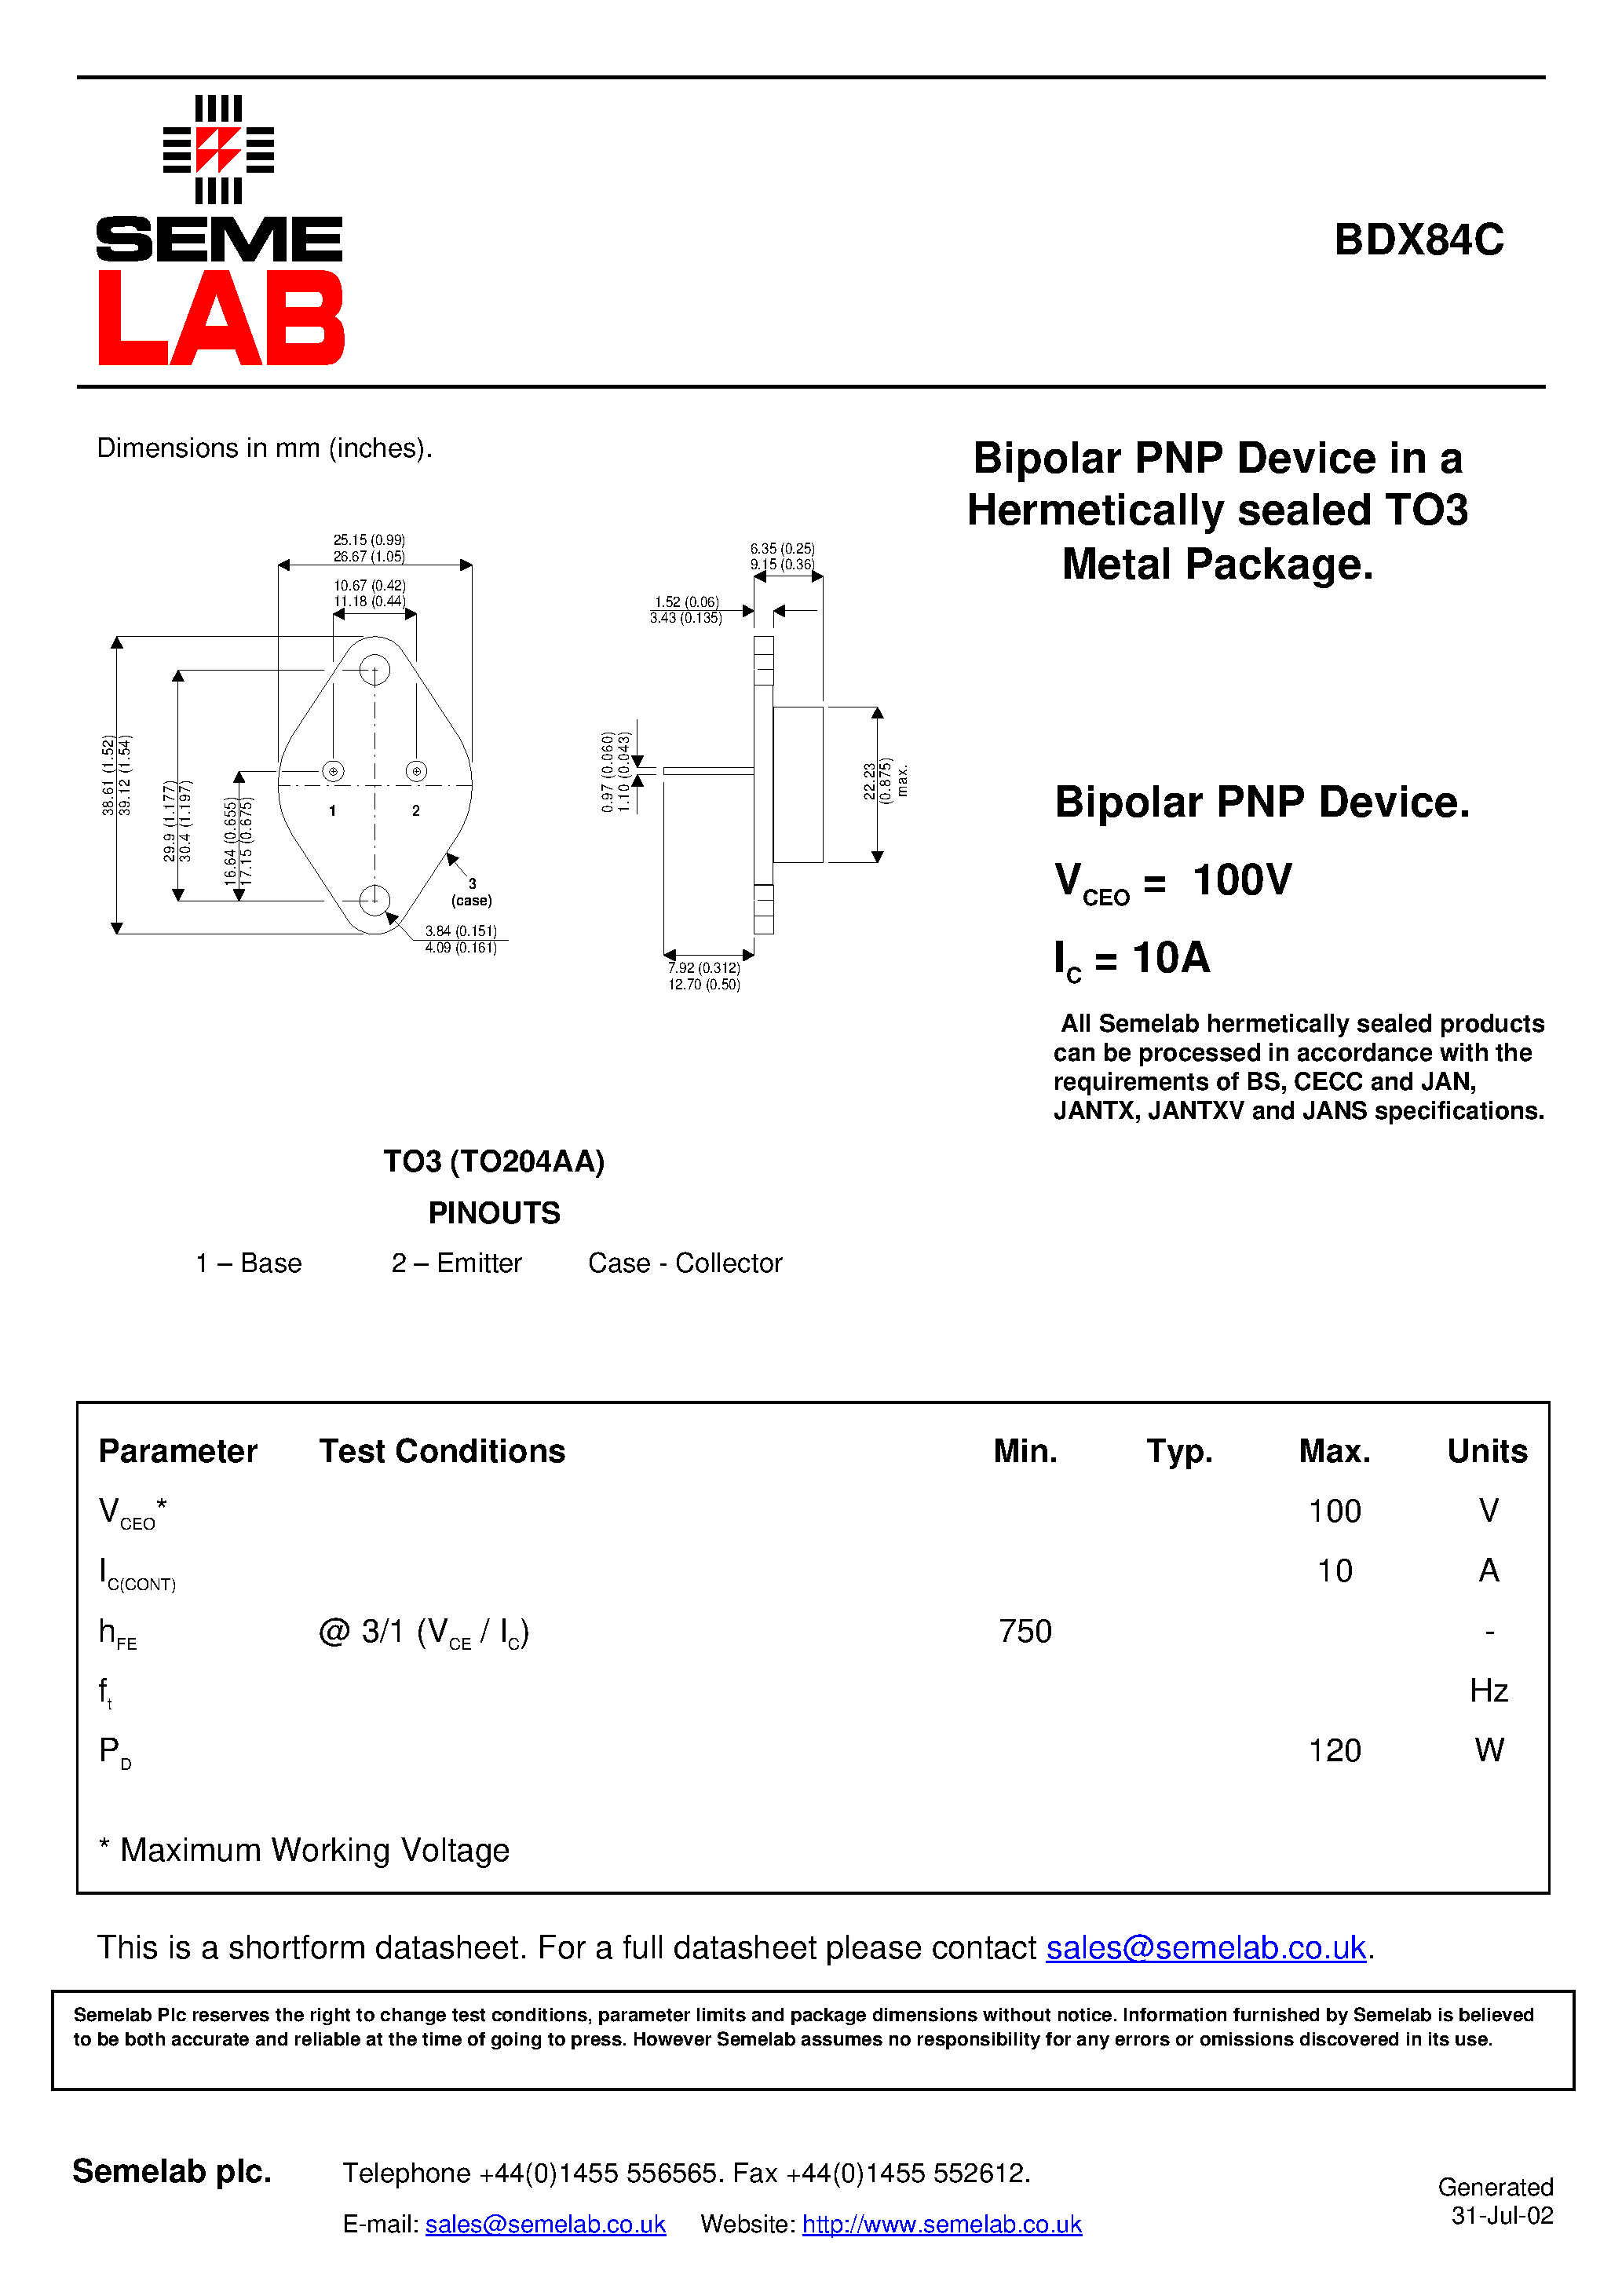 Datasheet BDX84C - Bipolar PNP Device in a Hermetically sealed TO3 Metal Package page 1